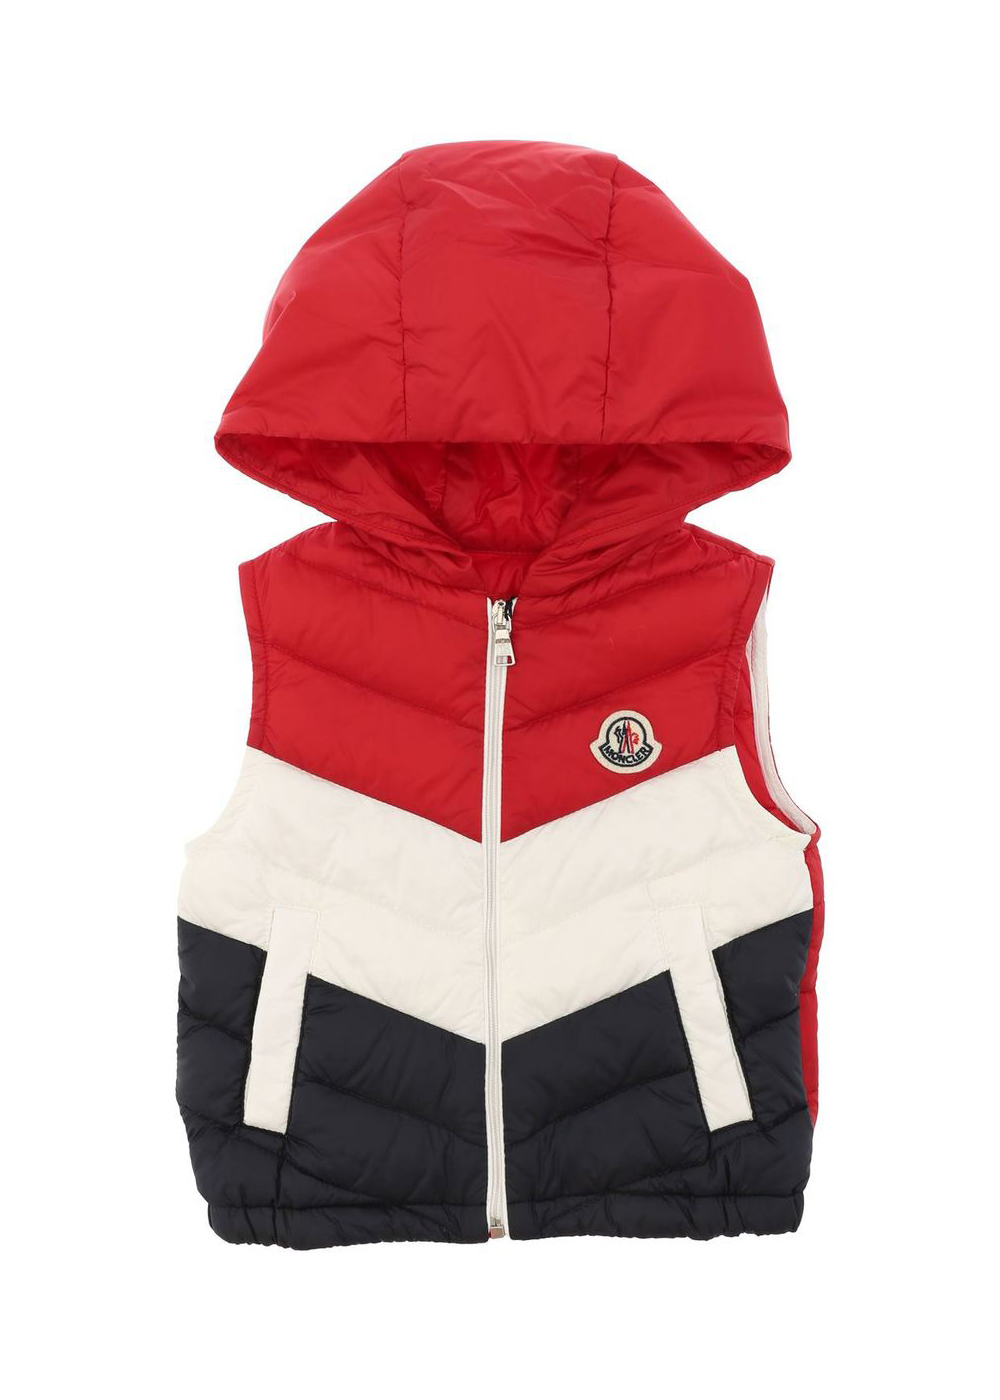 Featured image for “Moncler Gilet Hariki”